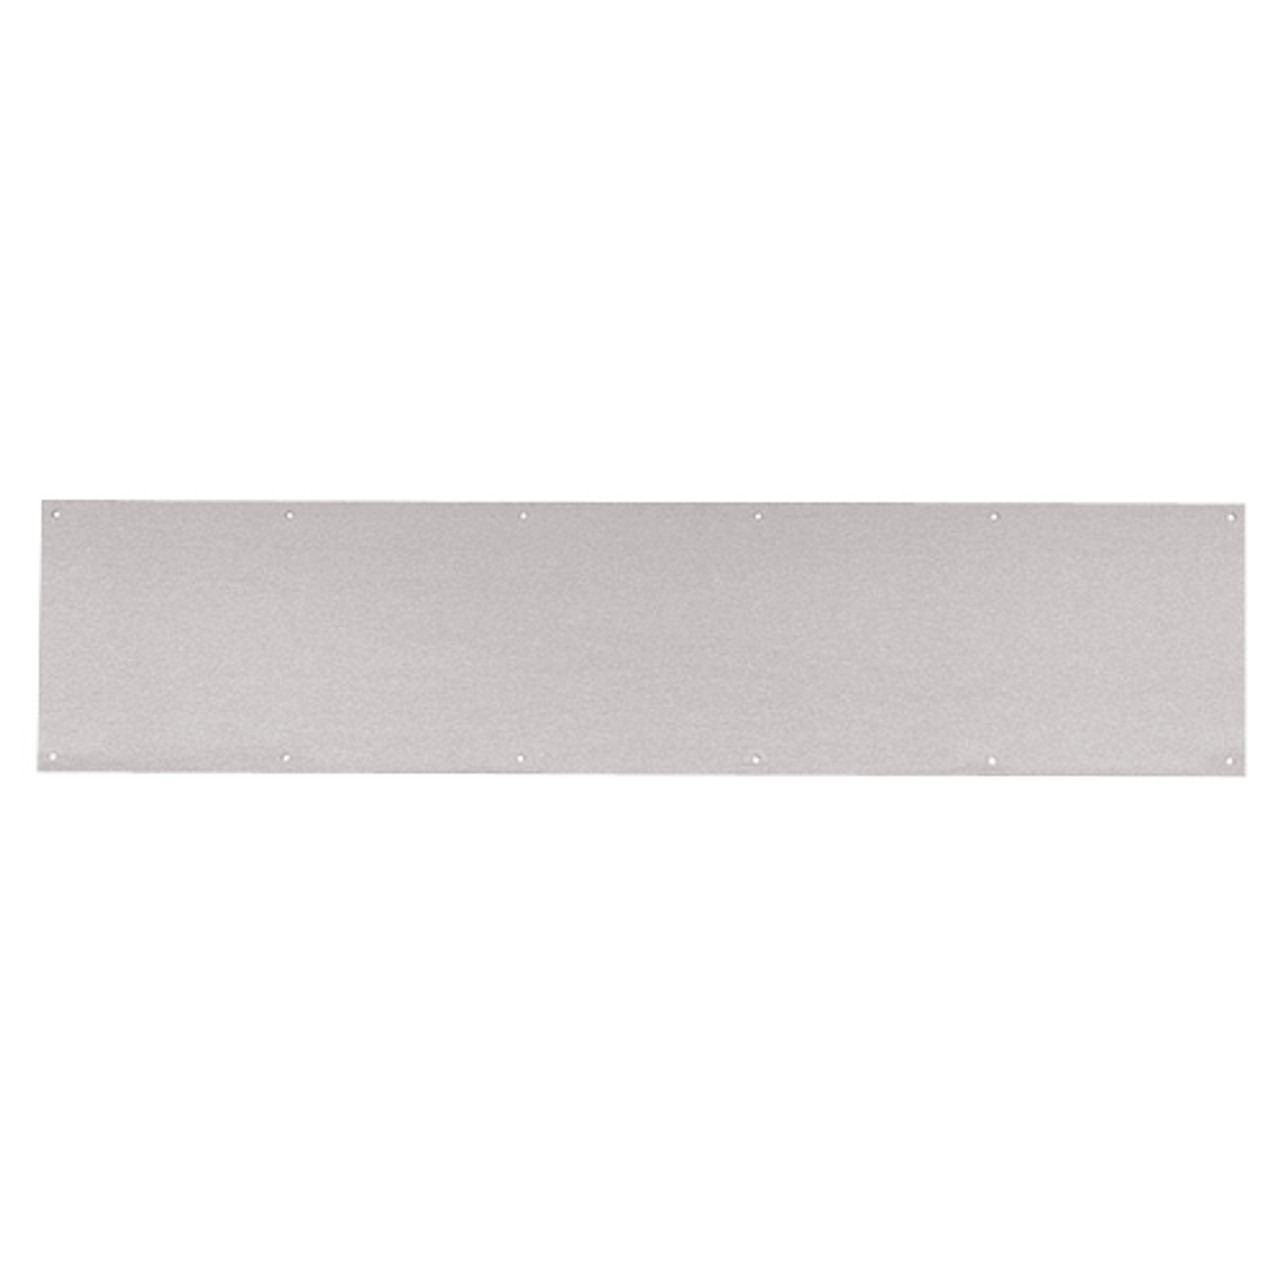 8400-US32D-5x35-B-CS Ives 8400 Series Protection Plate in Satin Stainless Steel